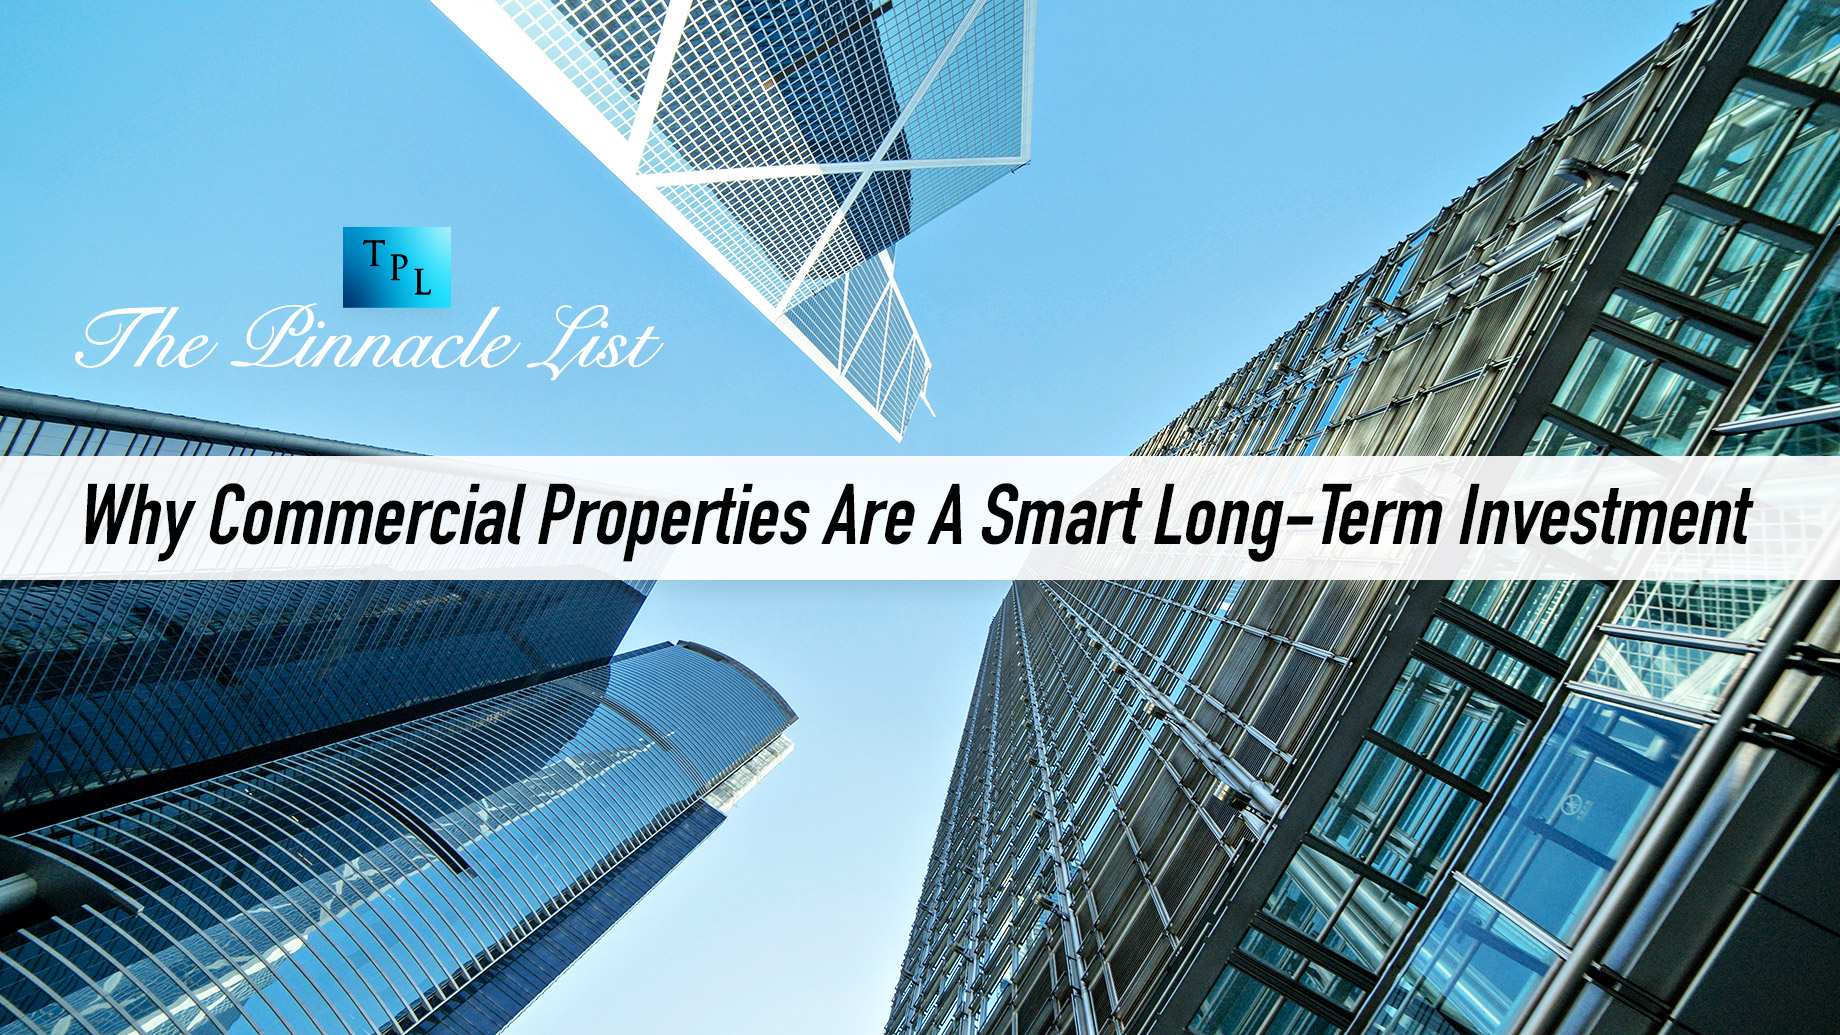 Why Commercial Properties Are A Smart Long-Term Investment